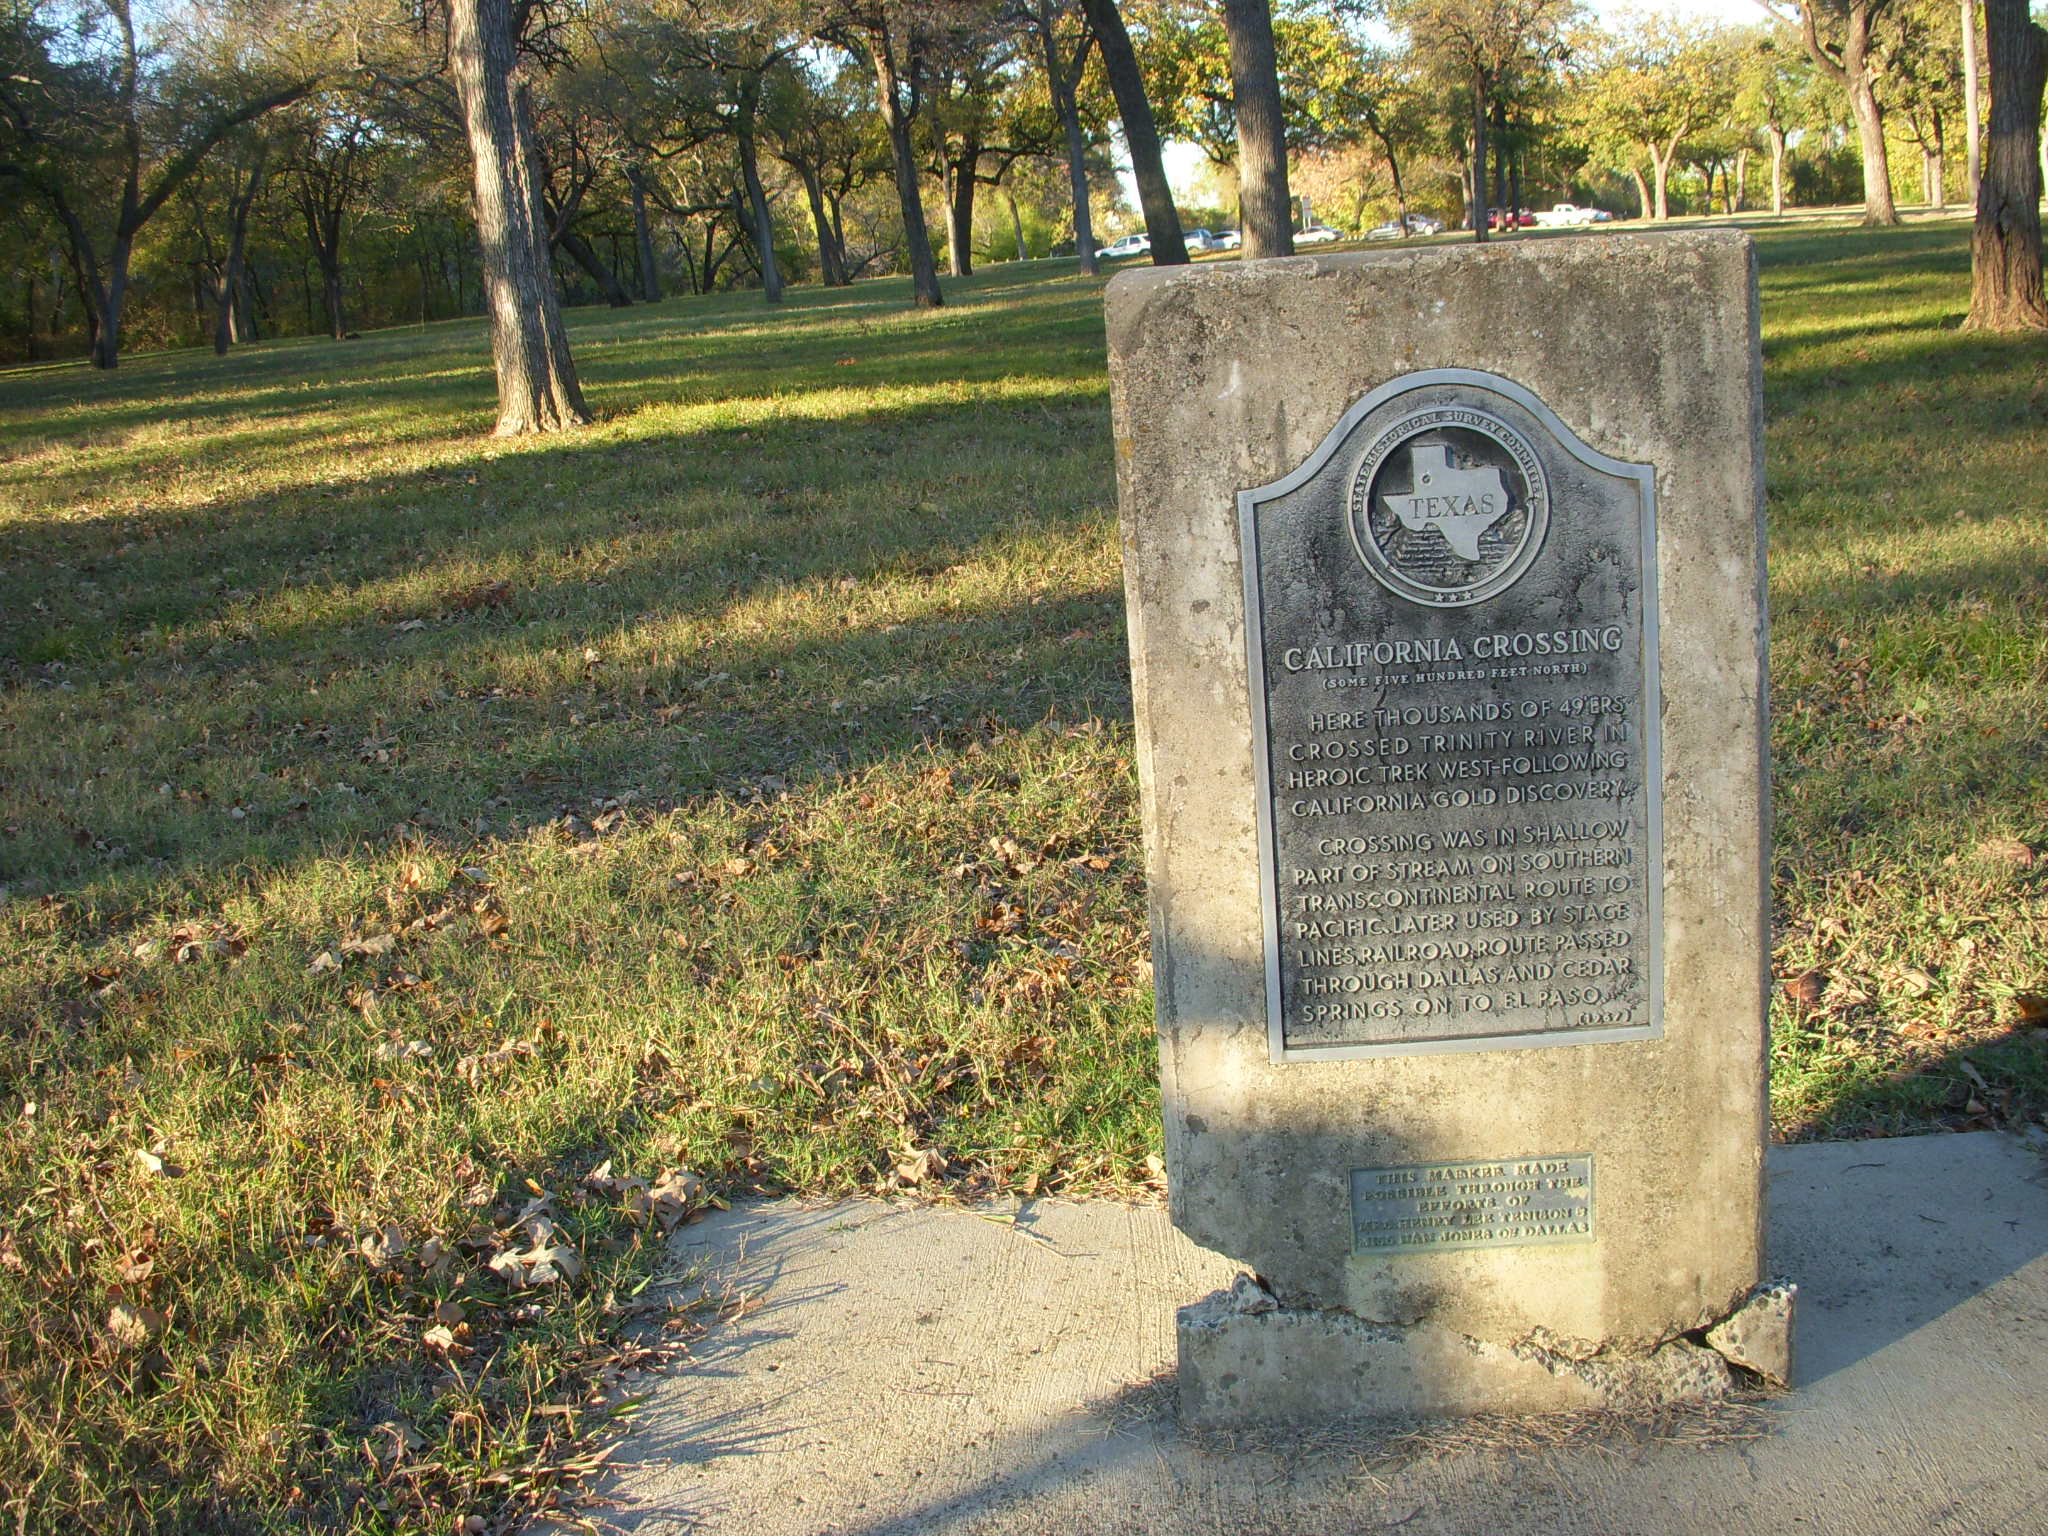 The California Crossing, Texas State Historical Marker